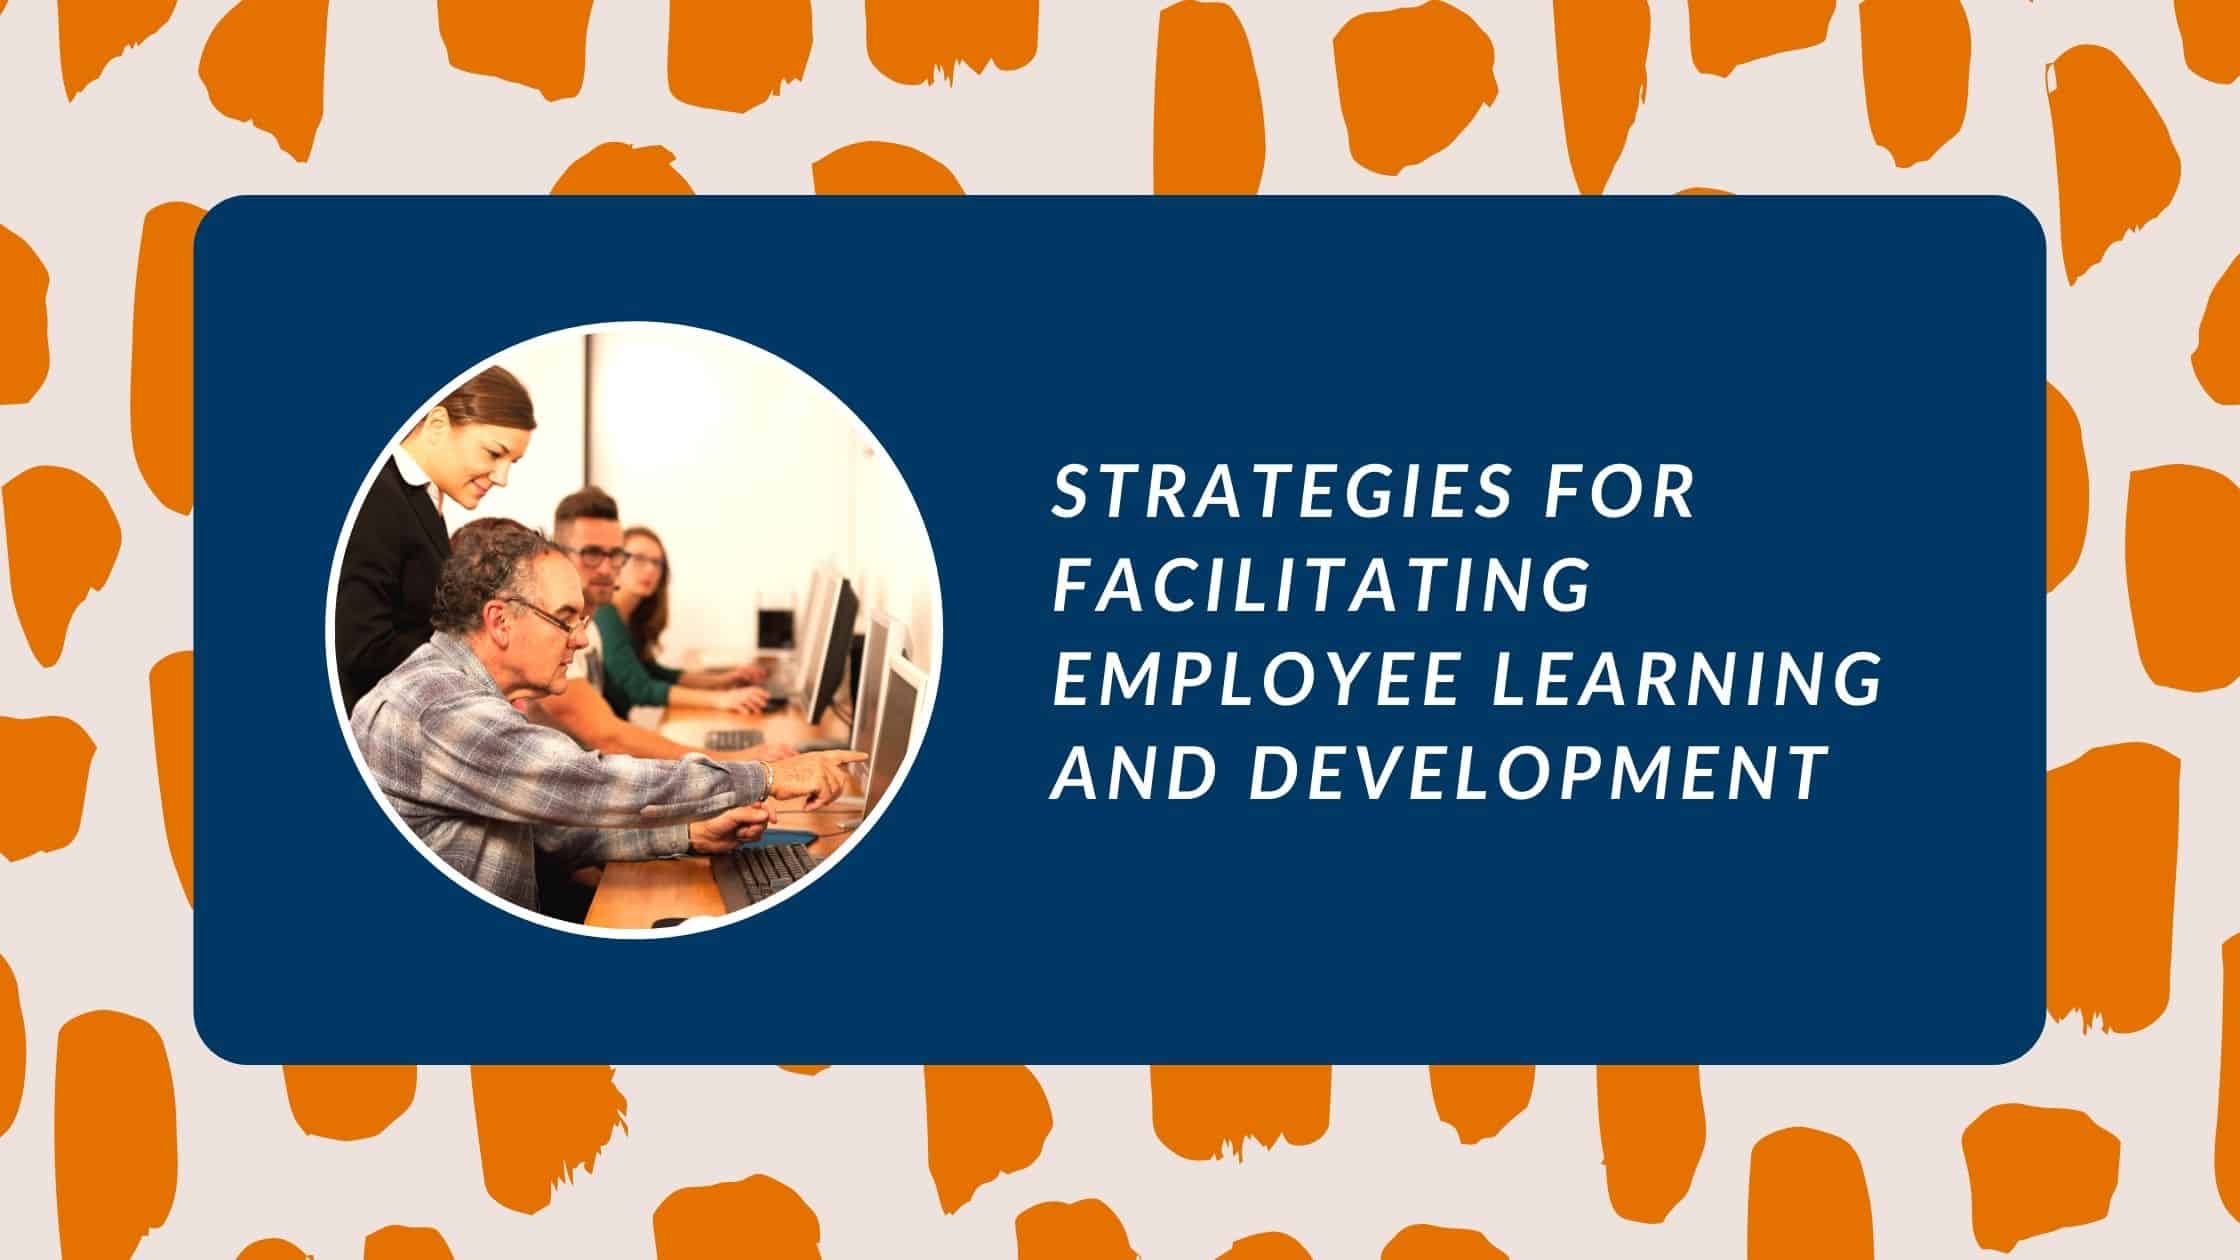 Employee Learning and Development Strategies for Managers